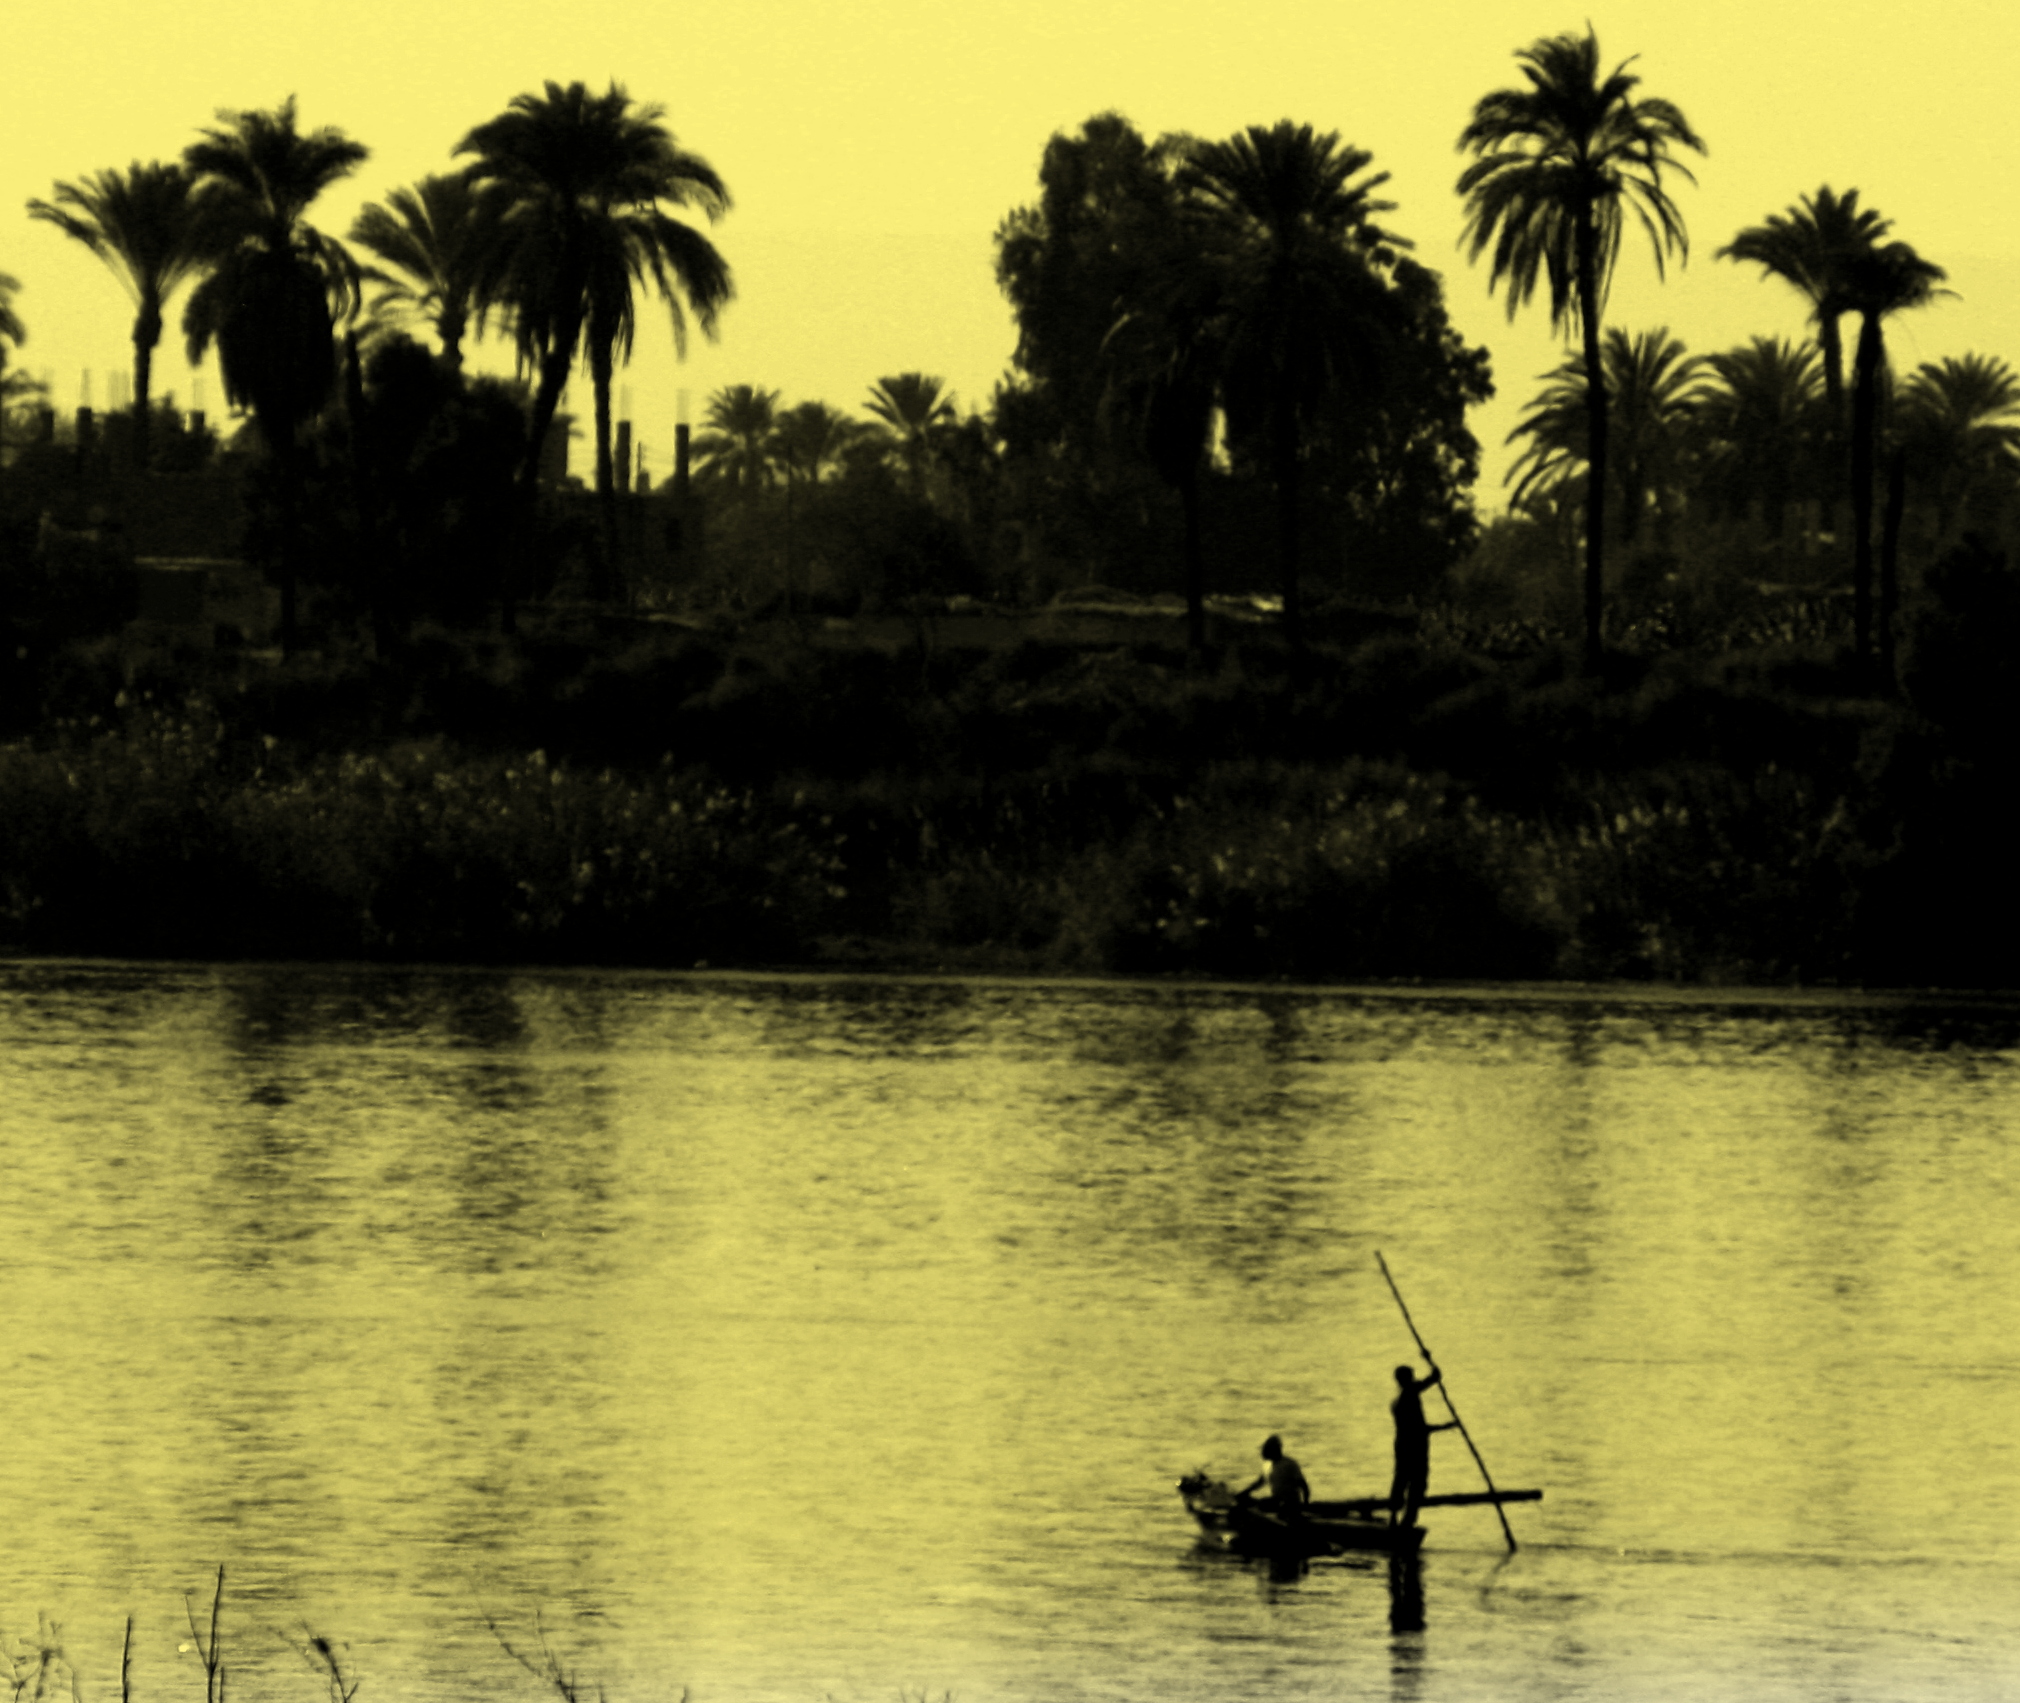 Boaters on the Nile with palm trees at the back